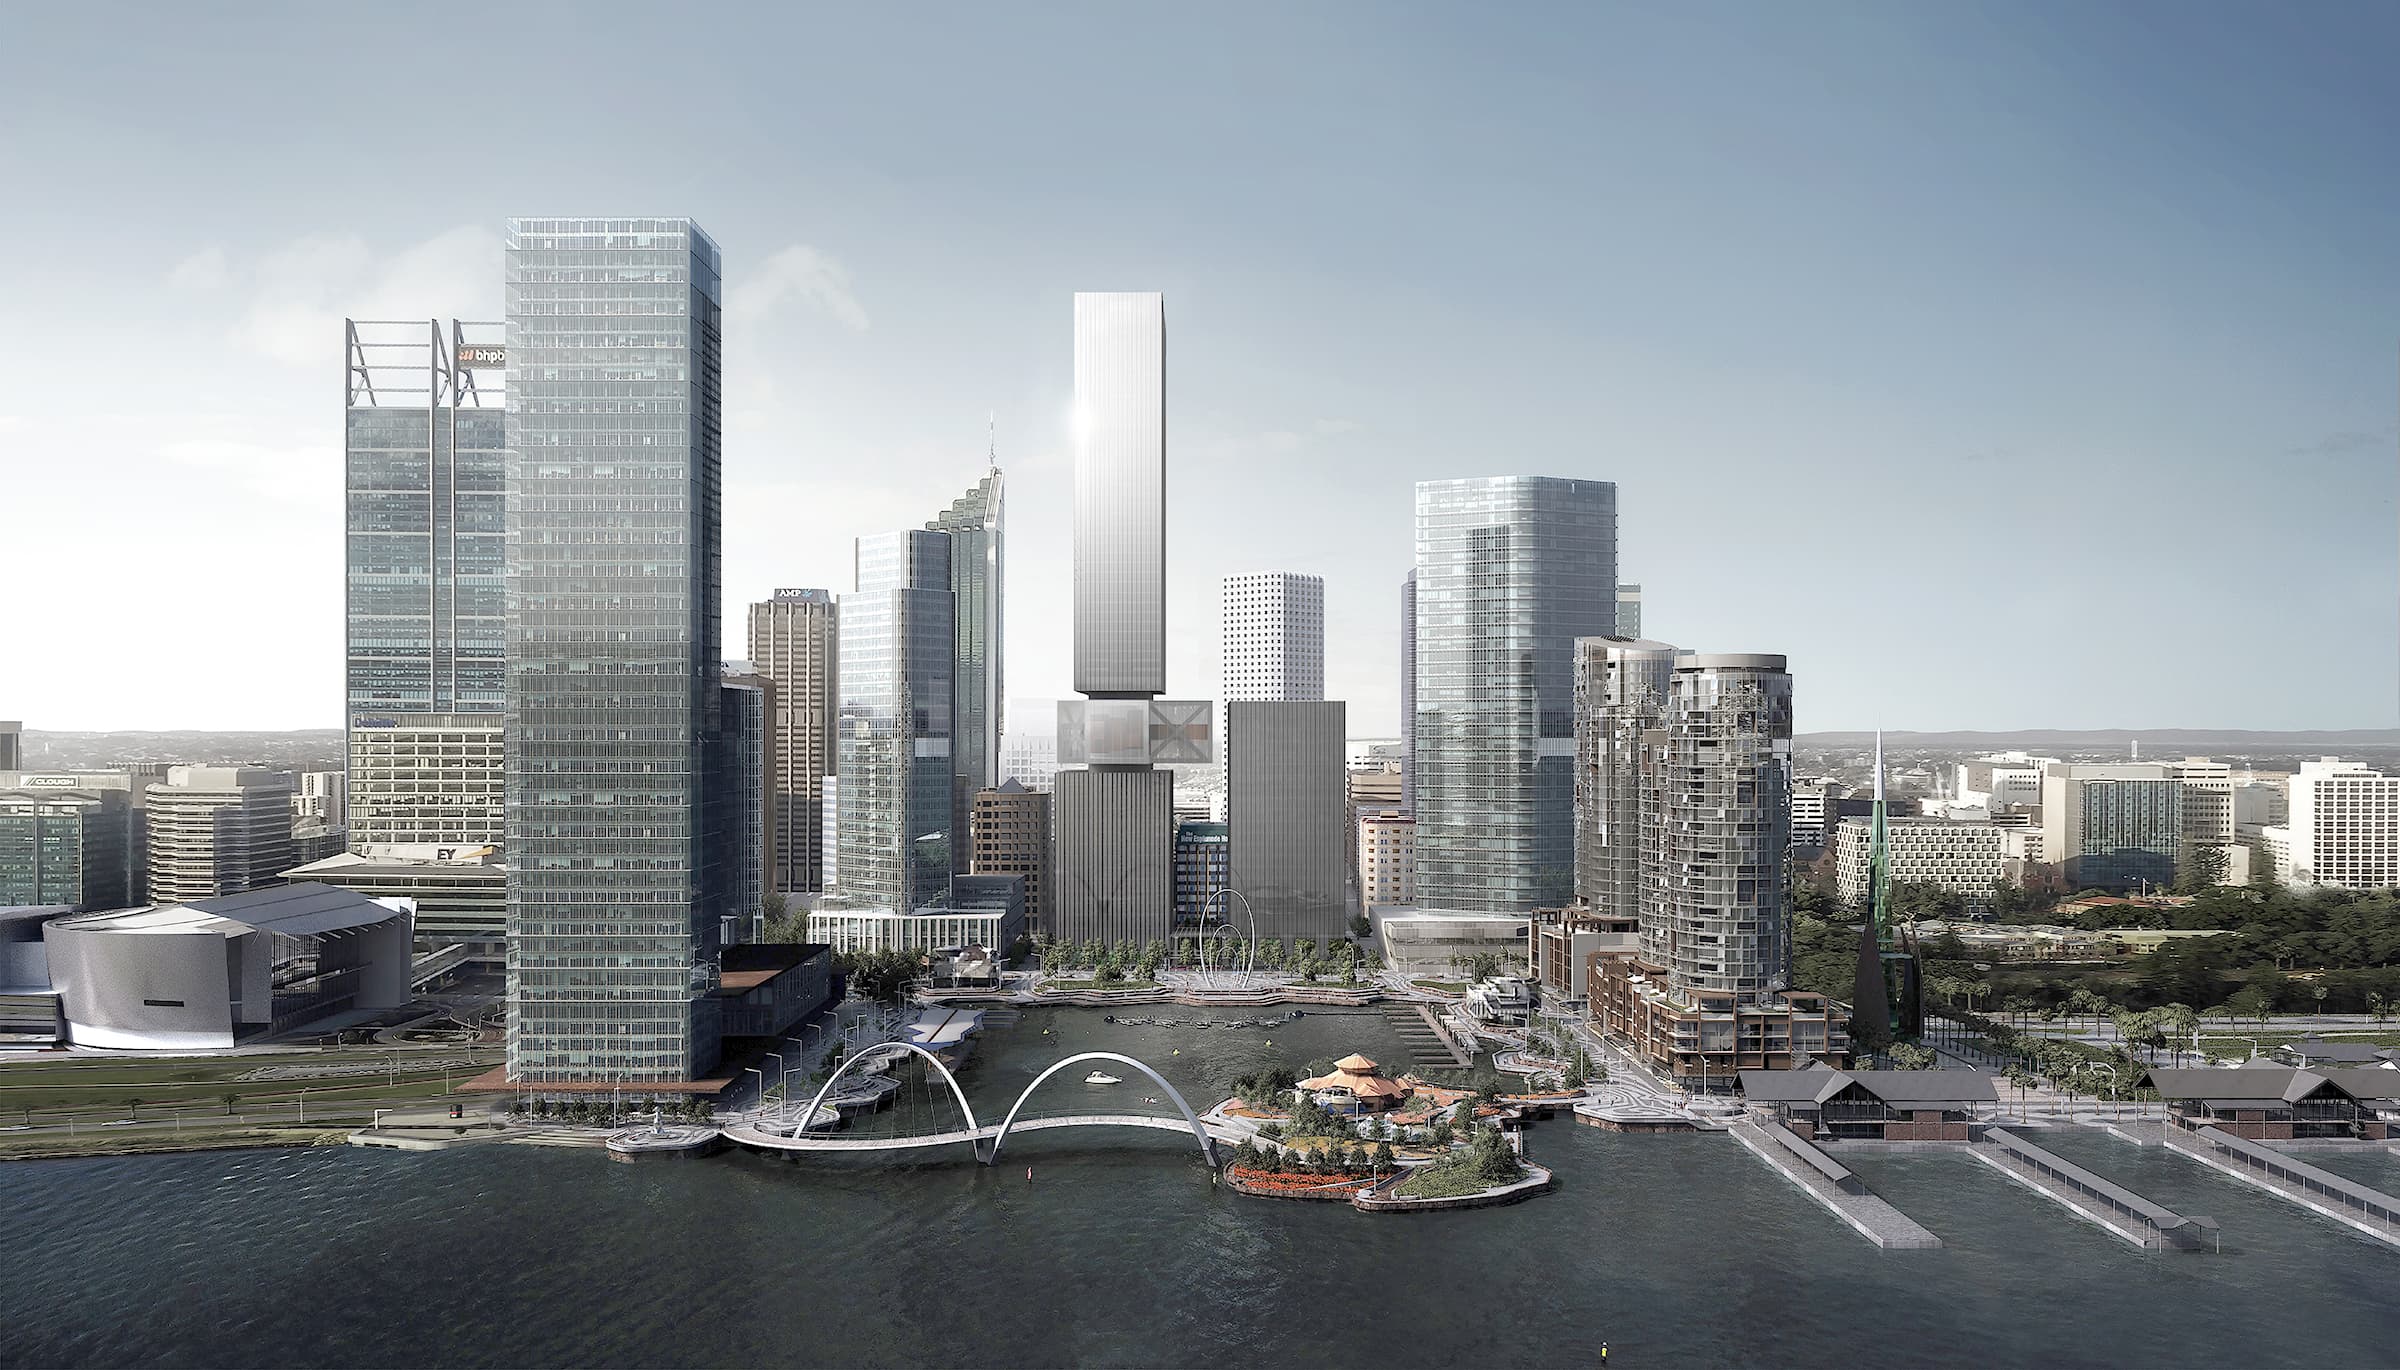 Visualization of Elizabeth Quay 5 & 6 mixed-use towers 1.0, designed by REX.